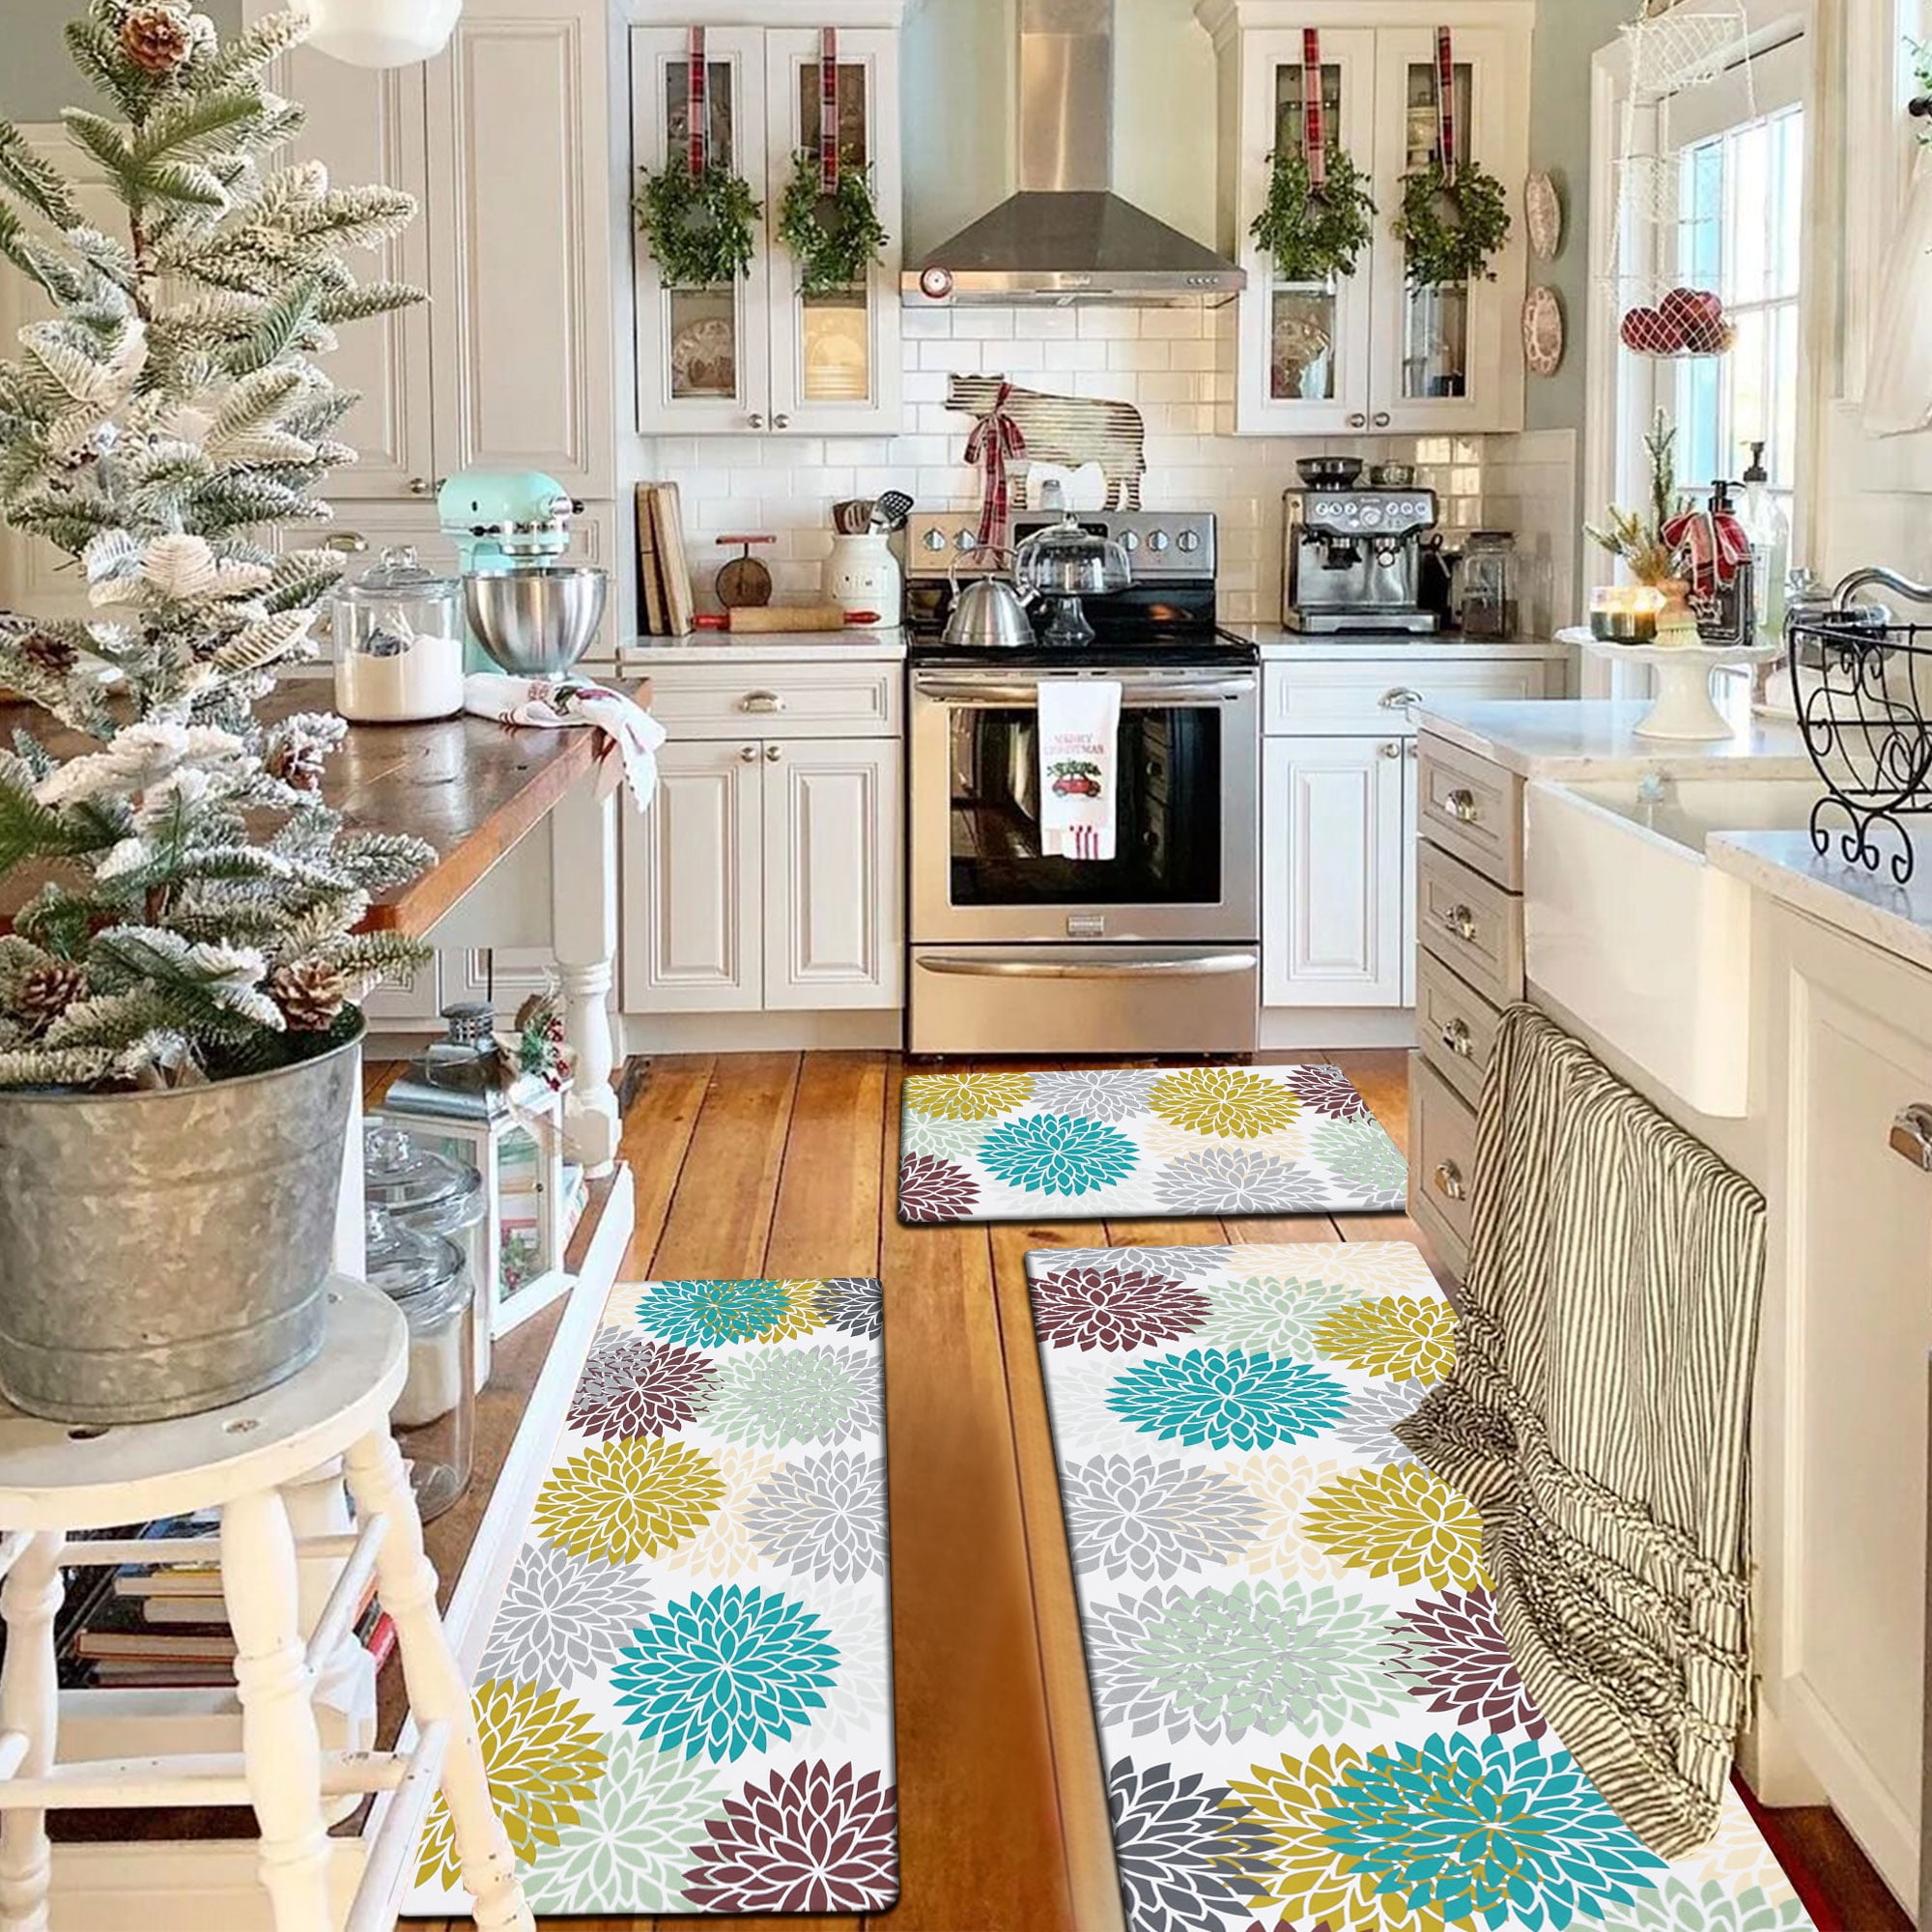 DIY Kitchen Rug - from a Yoga Mat — Once & Future Home